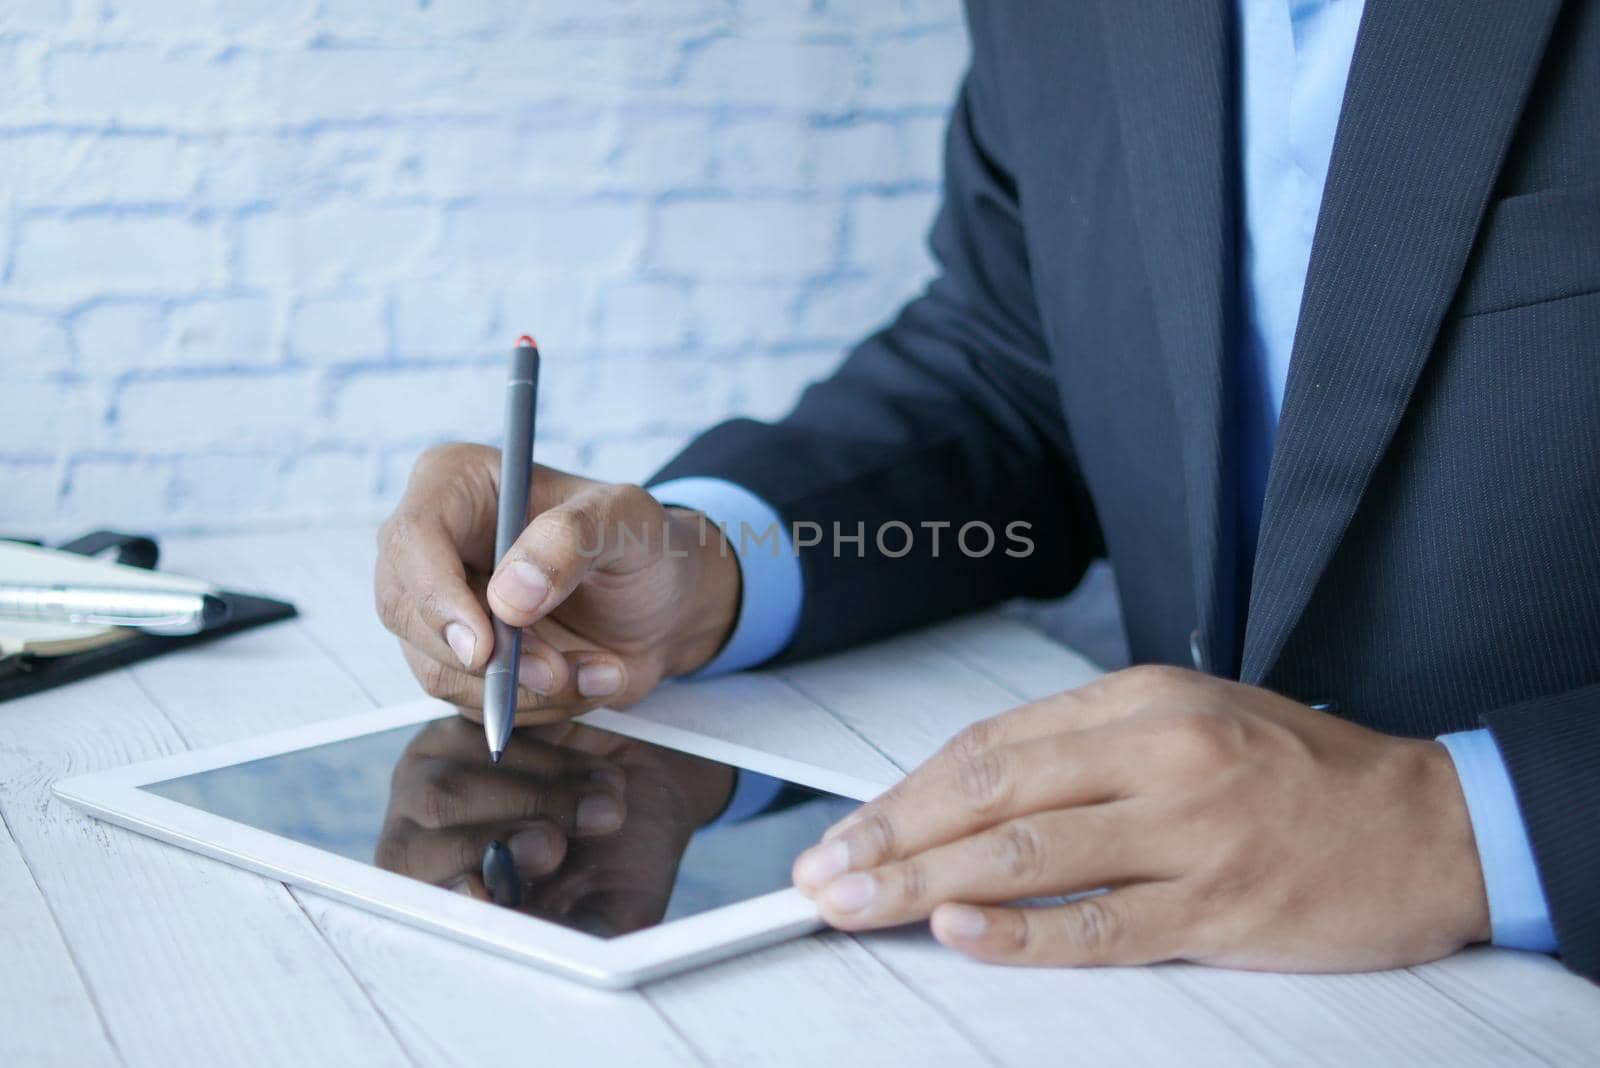 man's hand working on digital tablet on office desk by towfiq007